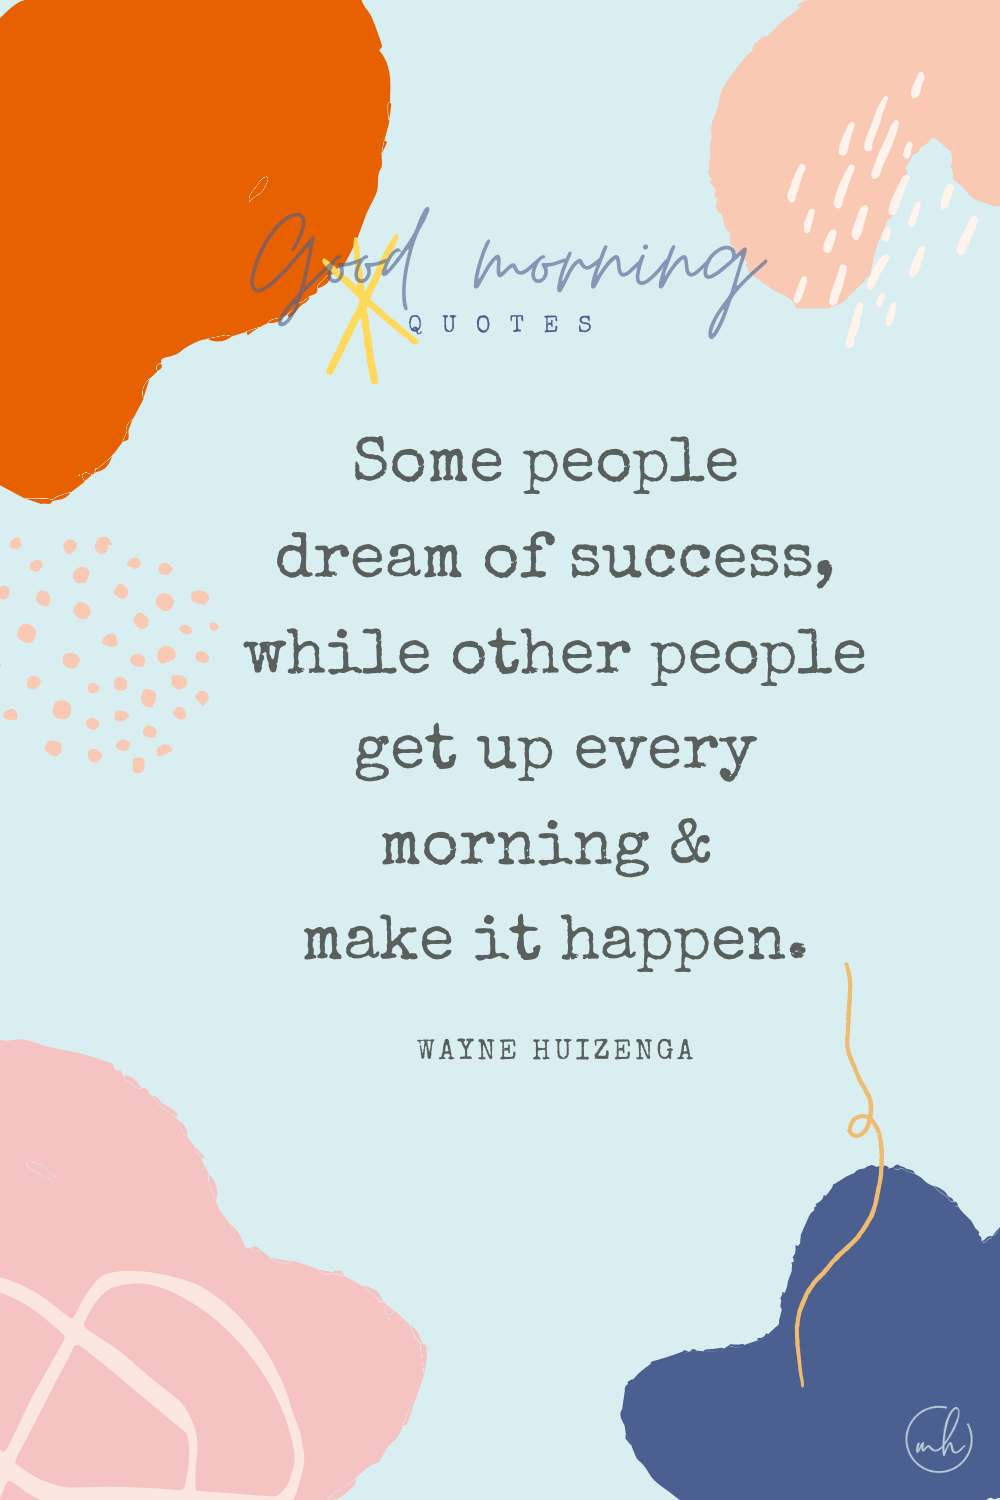 "Some people dream of success, while other people get up every morning and make it happen." – Wayne Huizenga